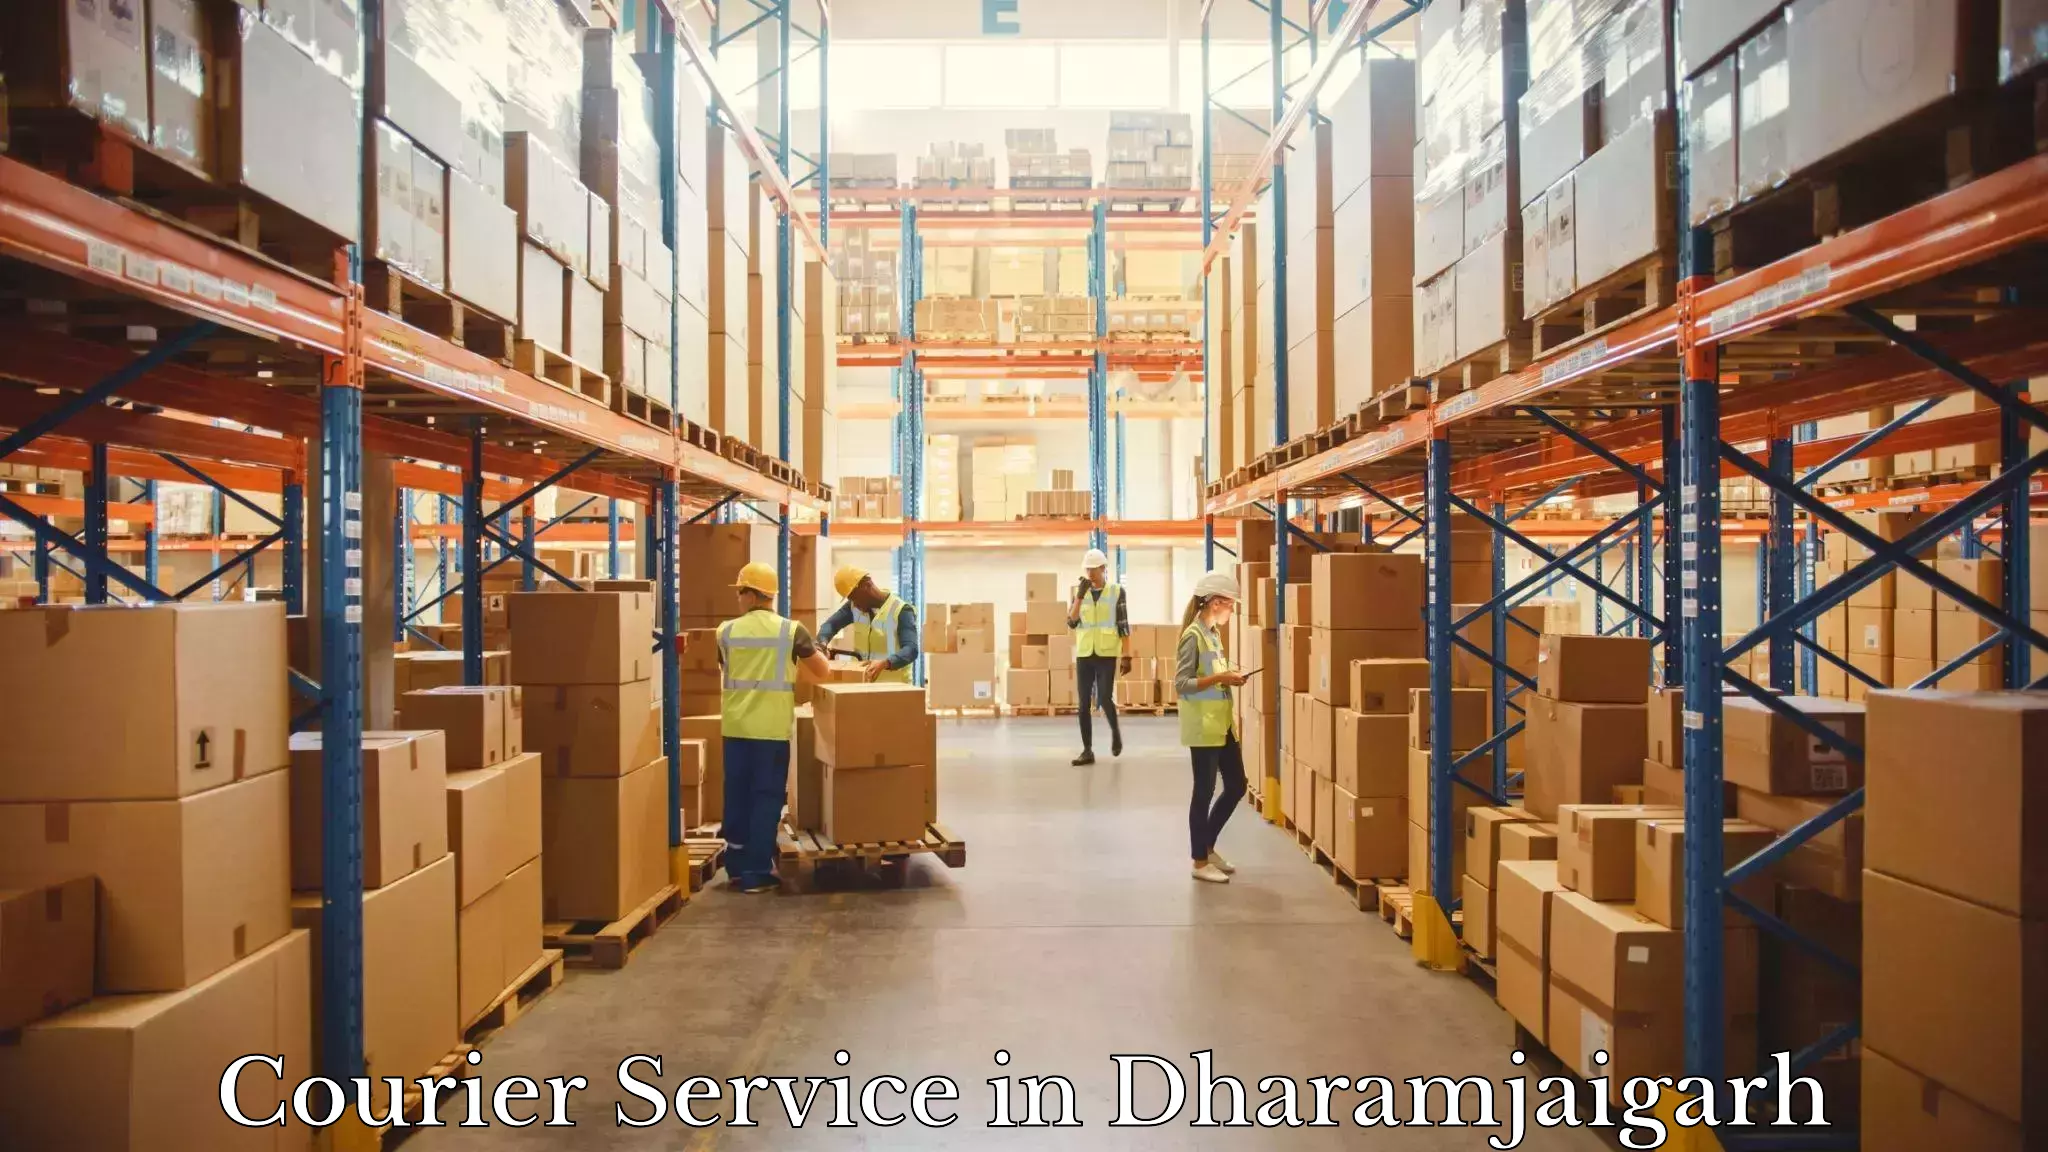 Same-day delivery solutions in Dharamjaigarh